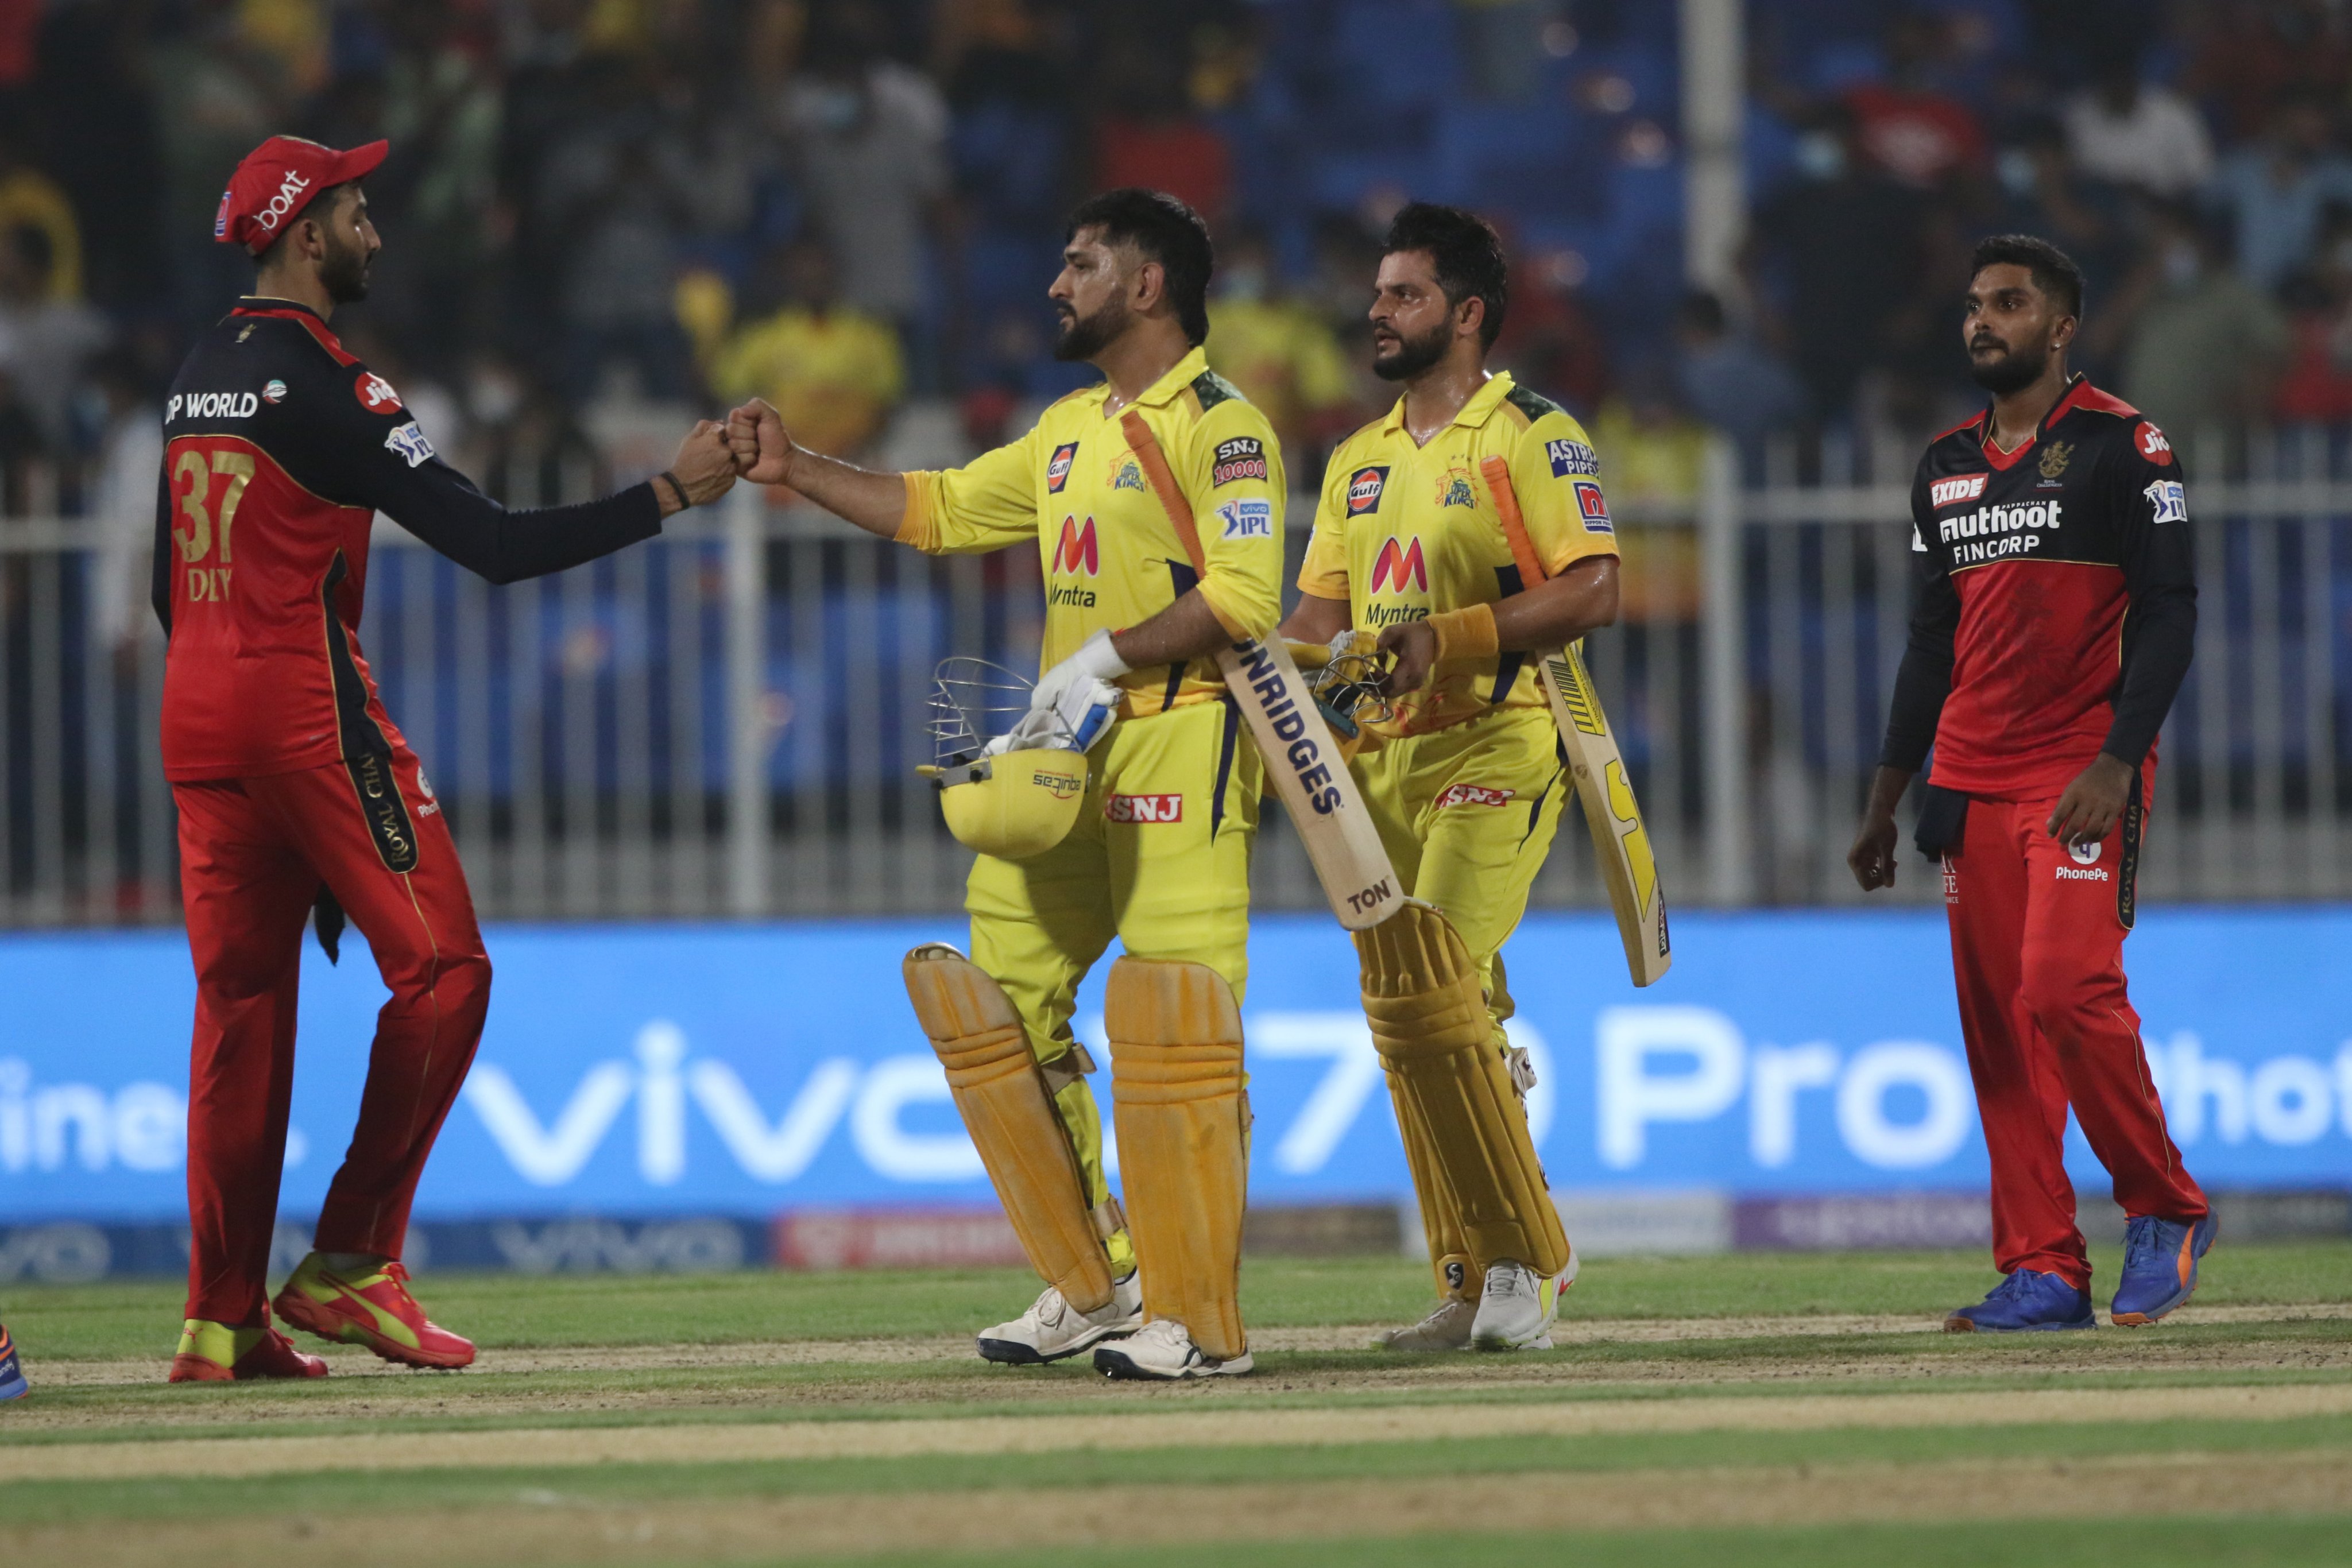 RCB wanted to take the game deep against CSK | BCCI/IPL